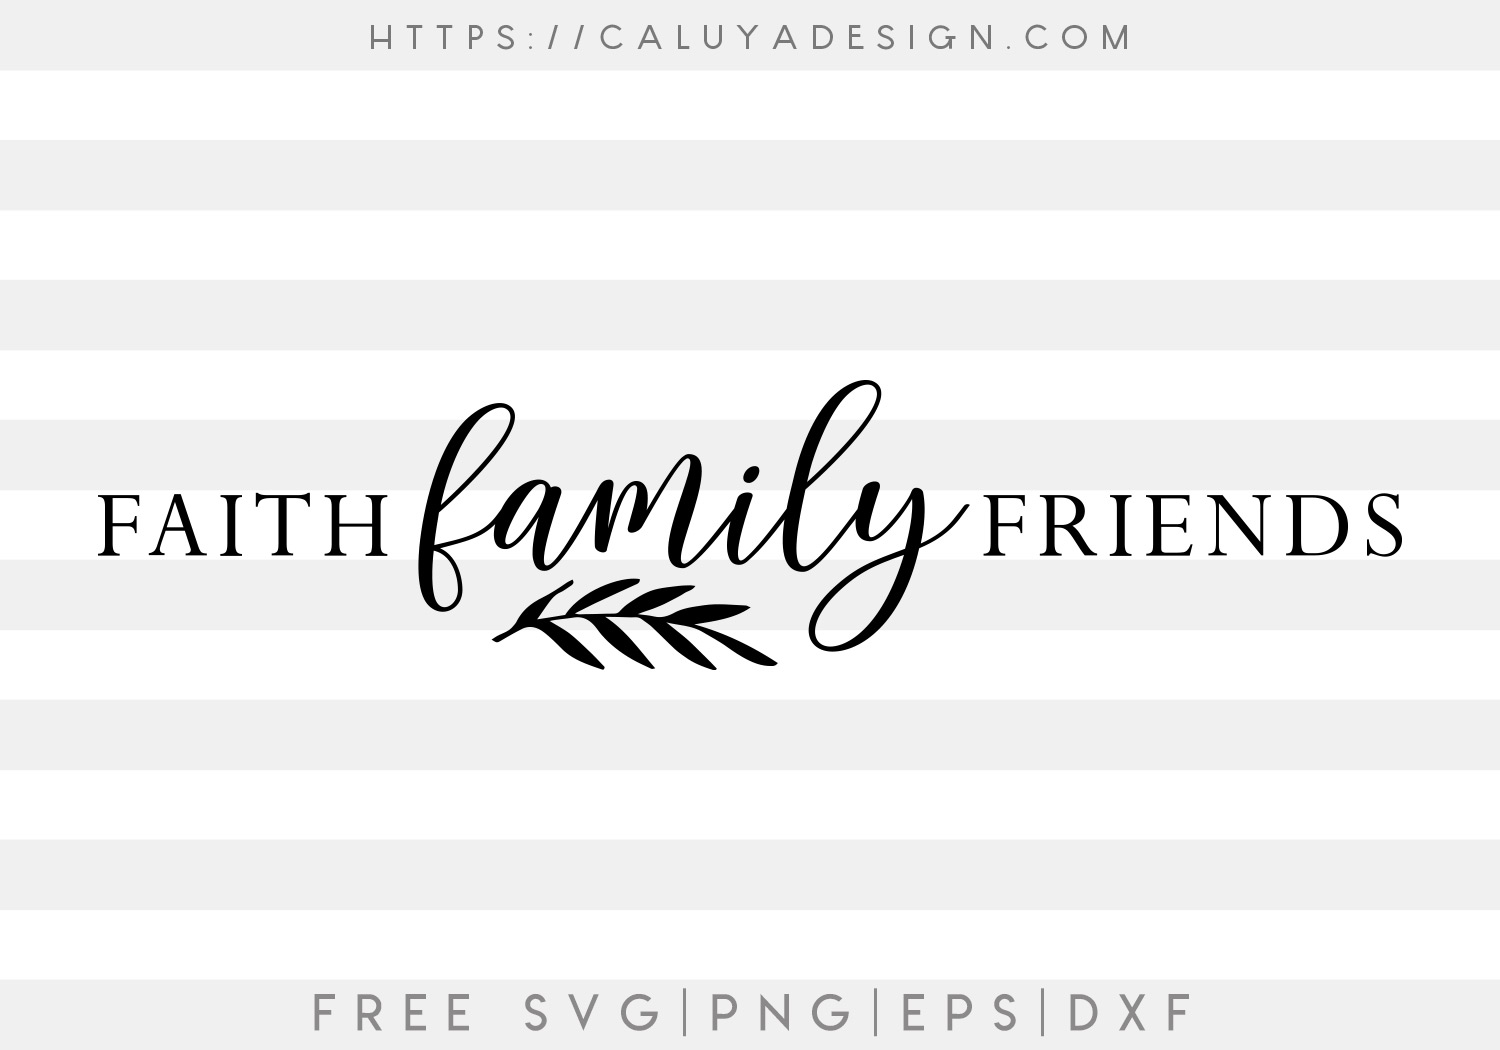 Faith Family Friends SVG, PNG, EPS & DXF